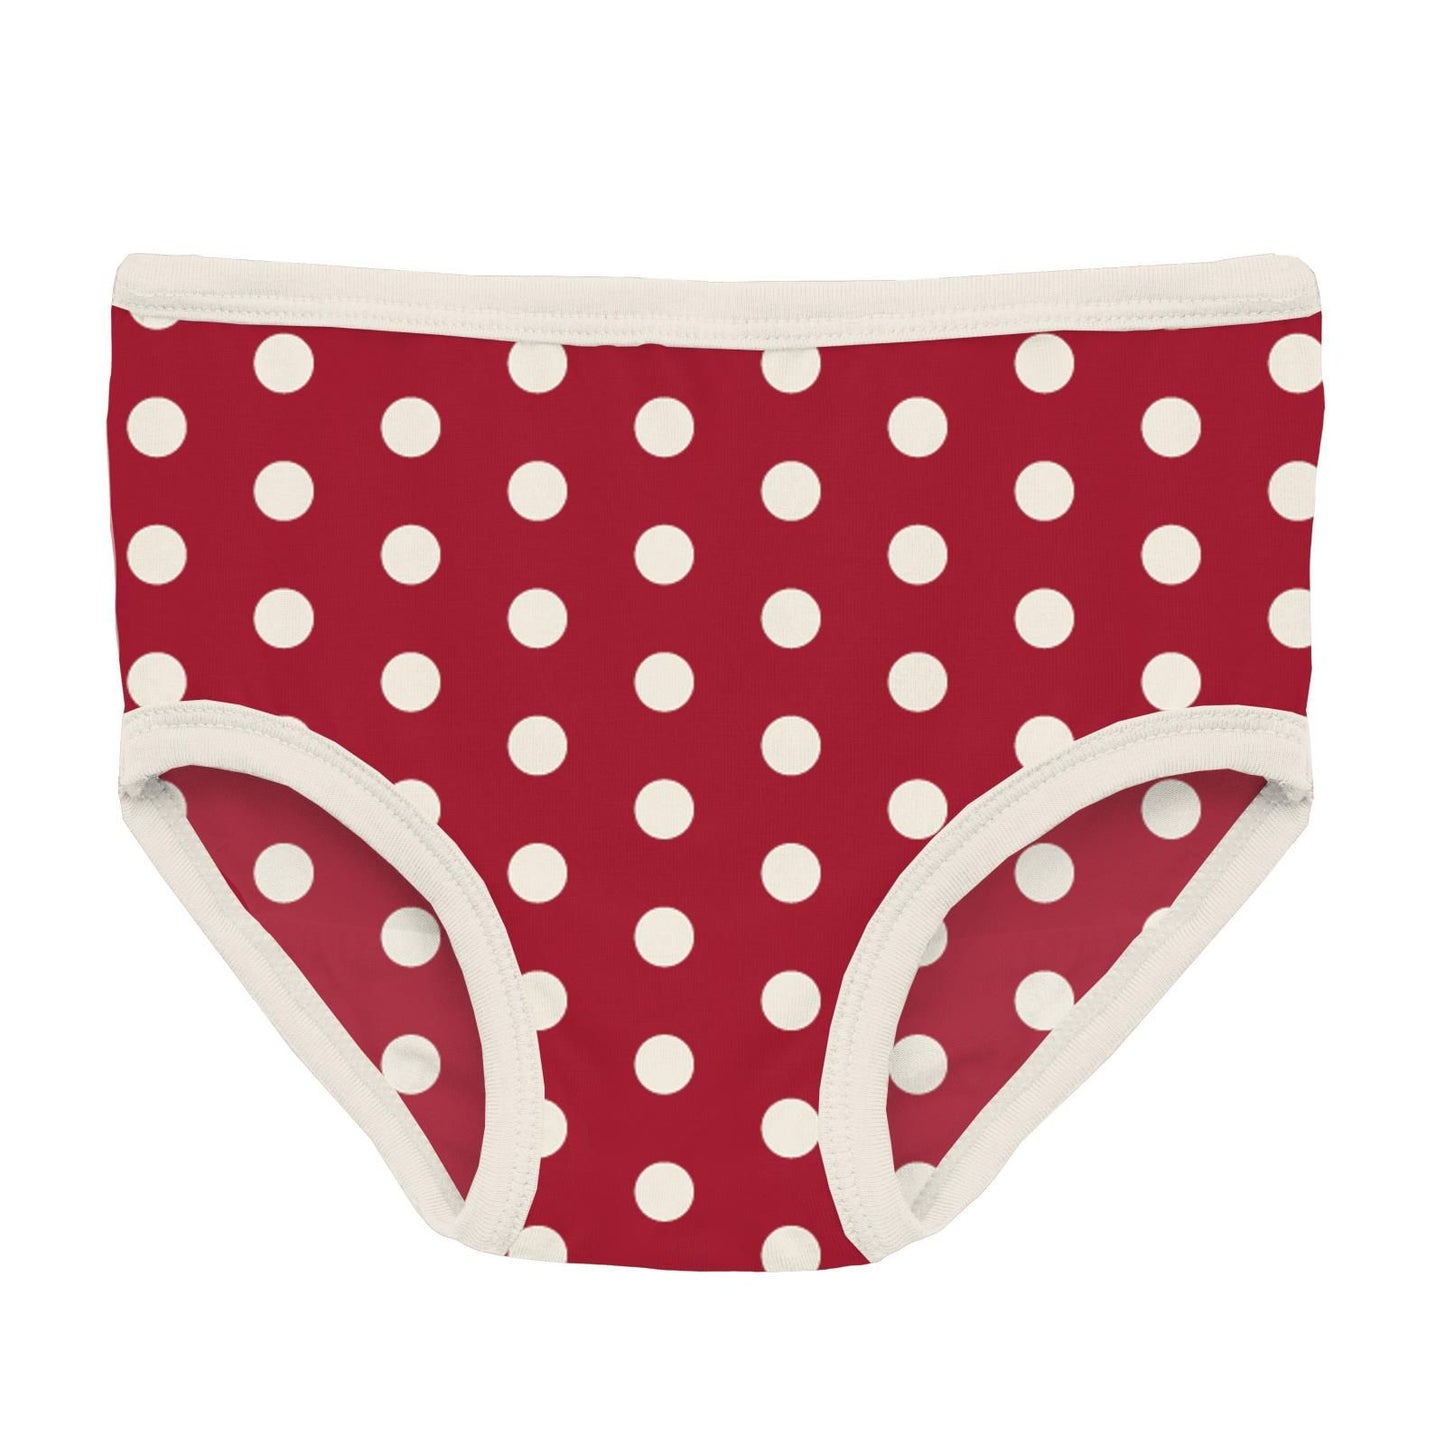 Last One - Size Large (10/12): Underwear - Candy Apple Polka Dots